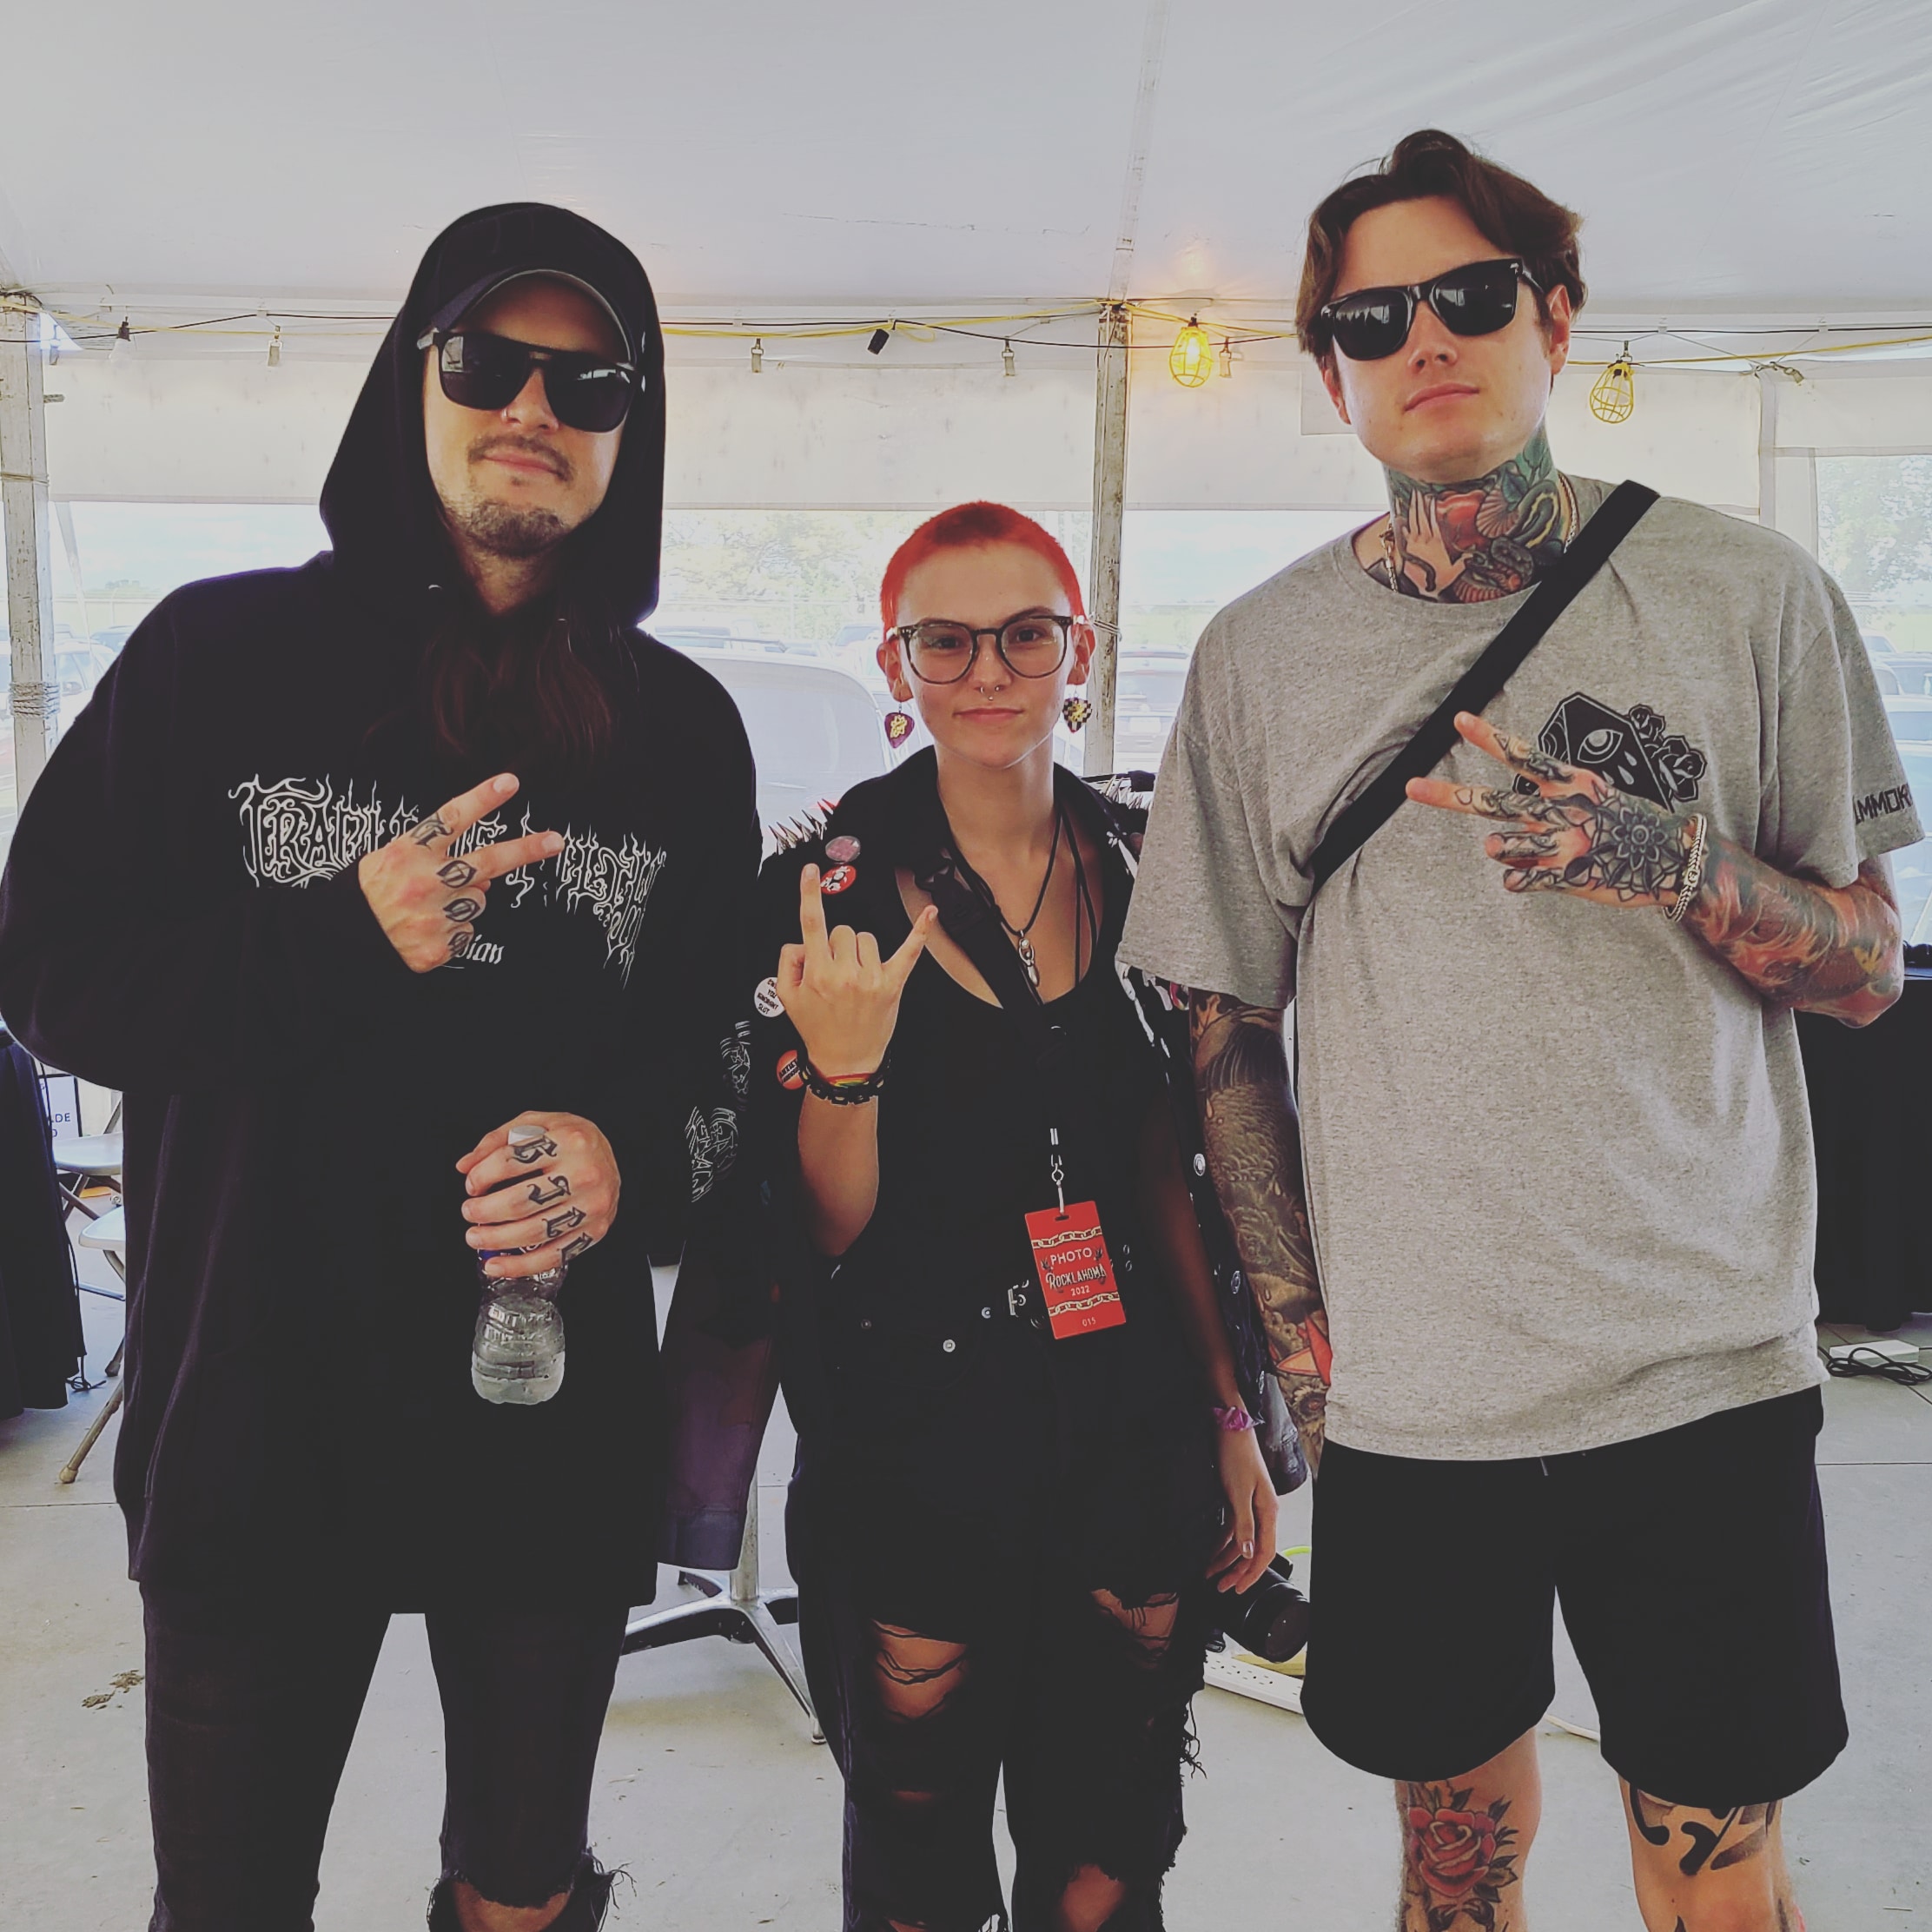 Backstage at Rocklahoma with BAD OMENS